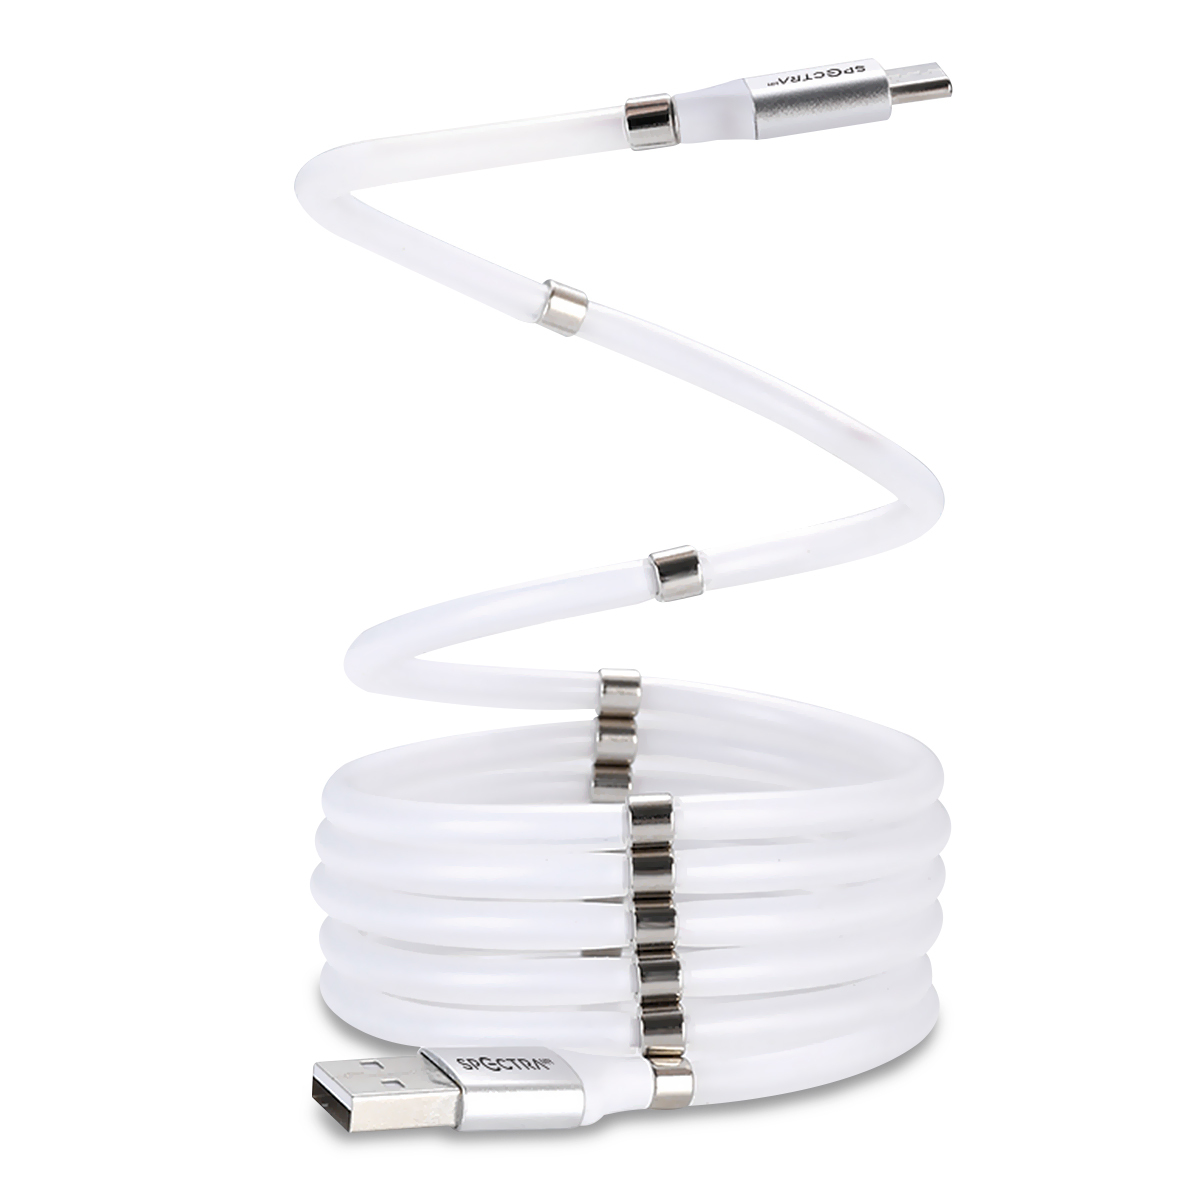 Cable USB a USB Tipo C Spectra M201 1 metro Blanco | Office Depot Mexico